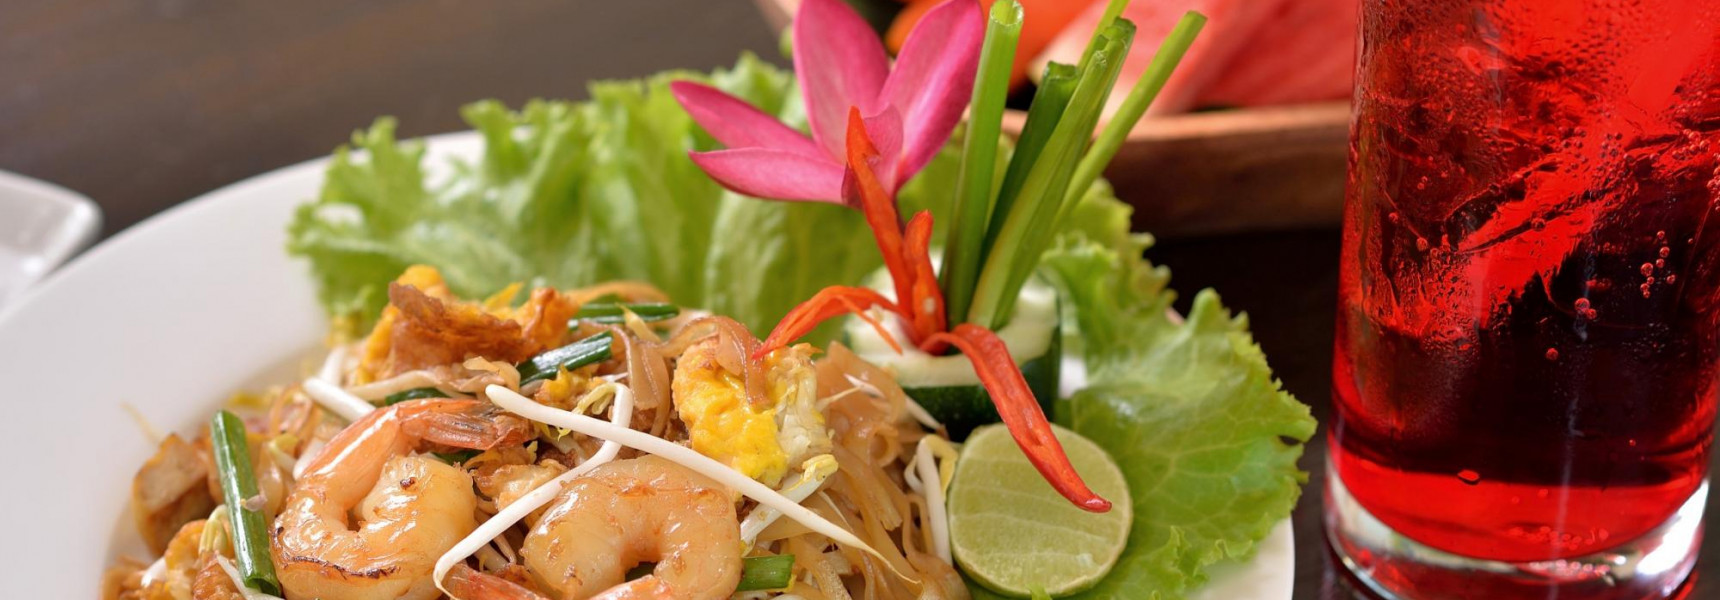 Top 5 FAQs About Bangkok Food and Drink